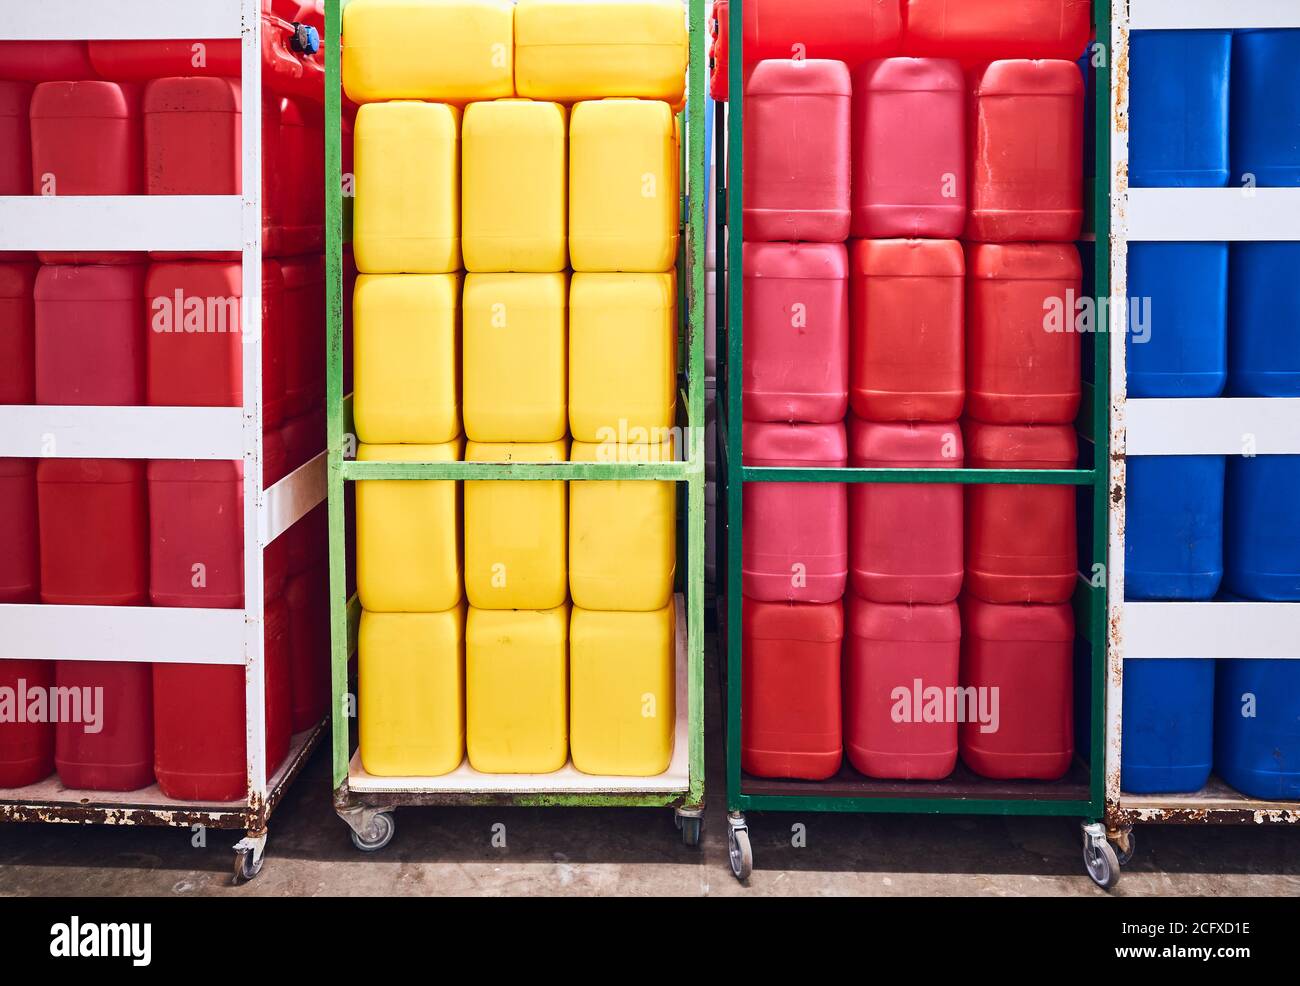 Red, yellow and blue plastic containers for chemicals. Stock Photo